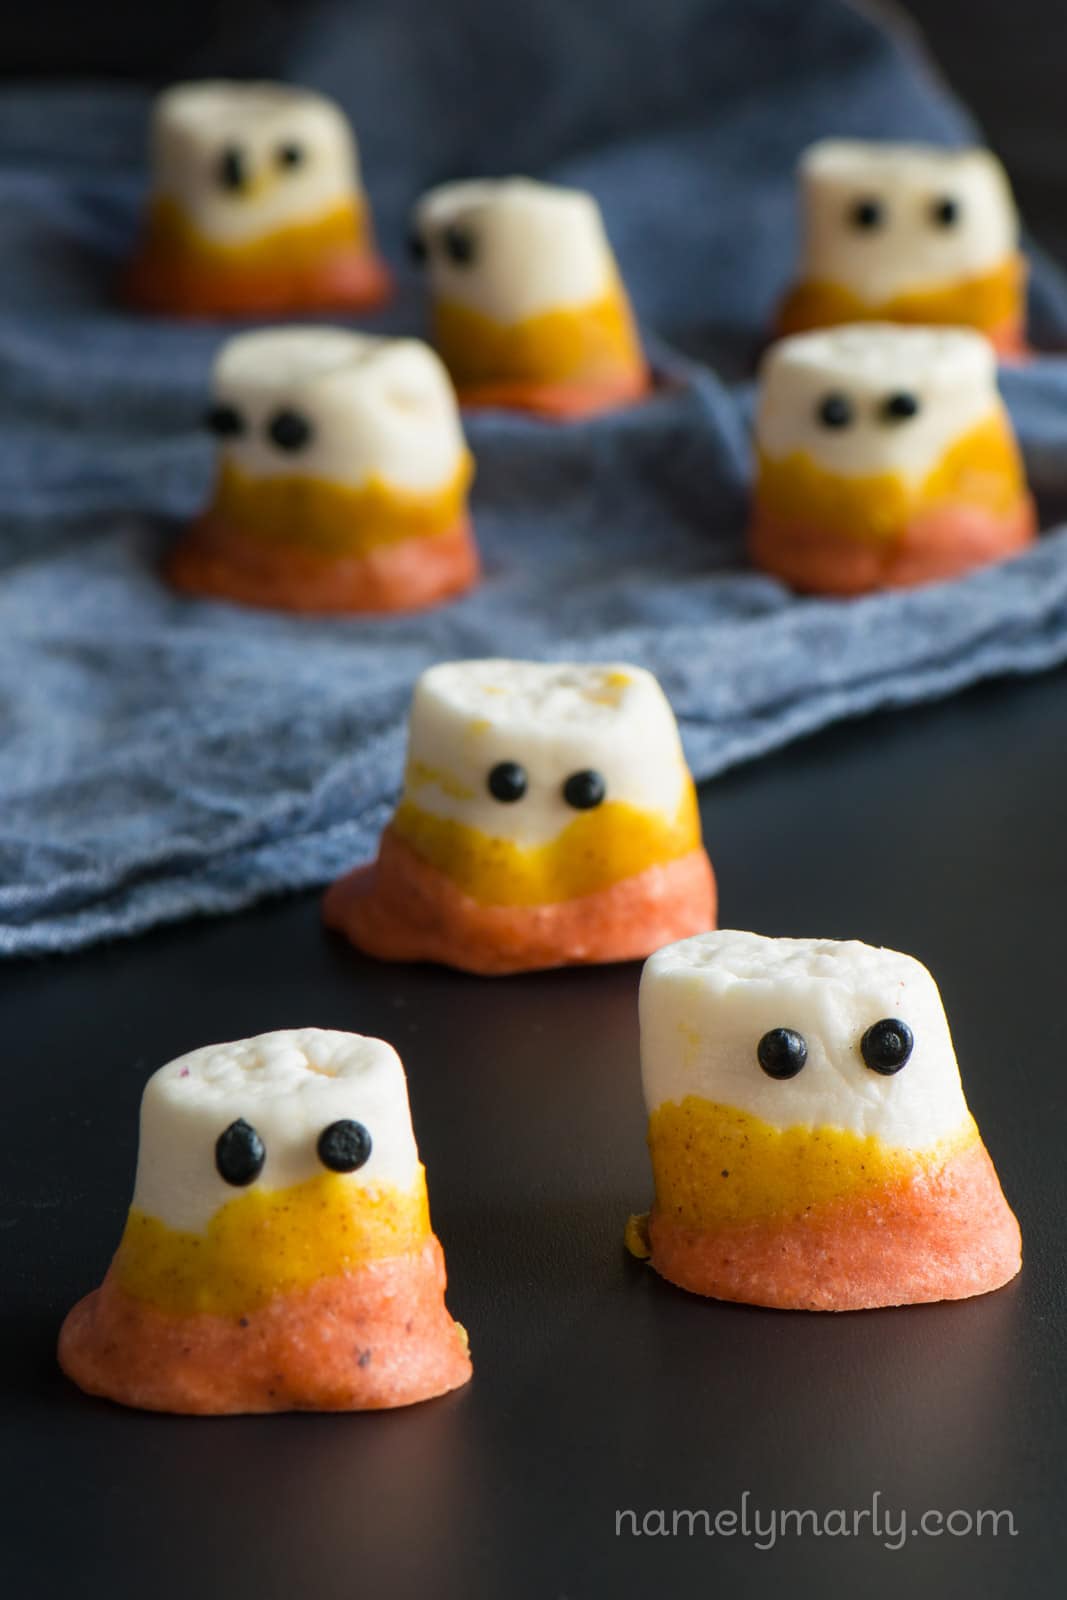 Several vegan marshmallows decorated with eyes and dipped in orange and yellow coating sit on a dark counter. 